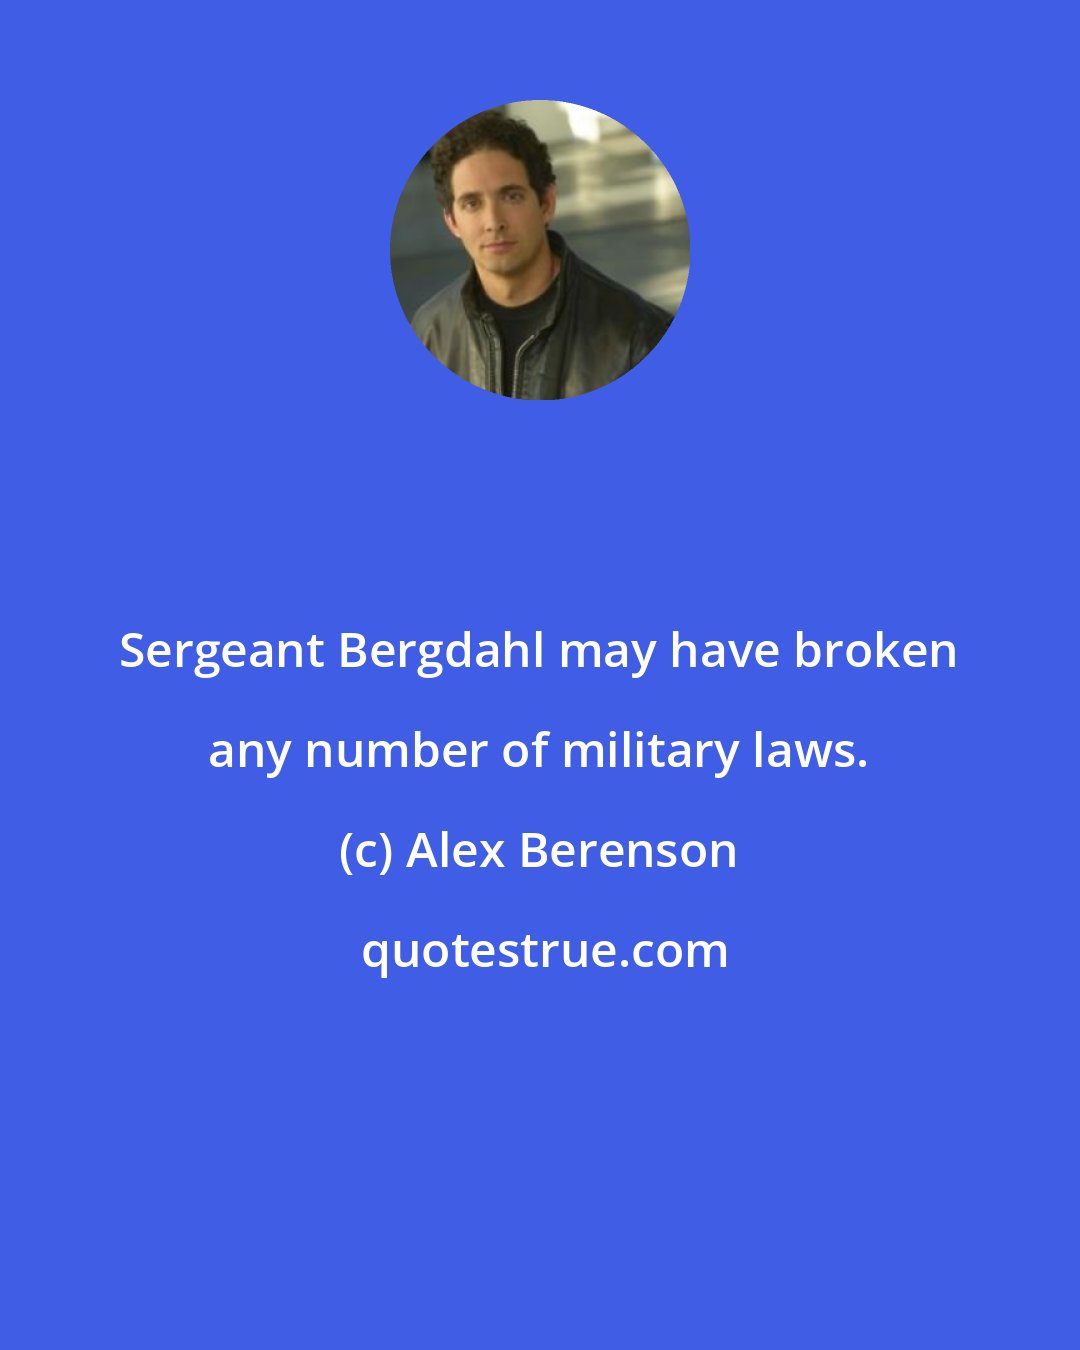 Alex Berenson: Sergeant Bergdahl may have broken any number of military laws.